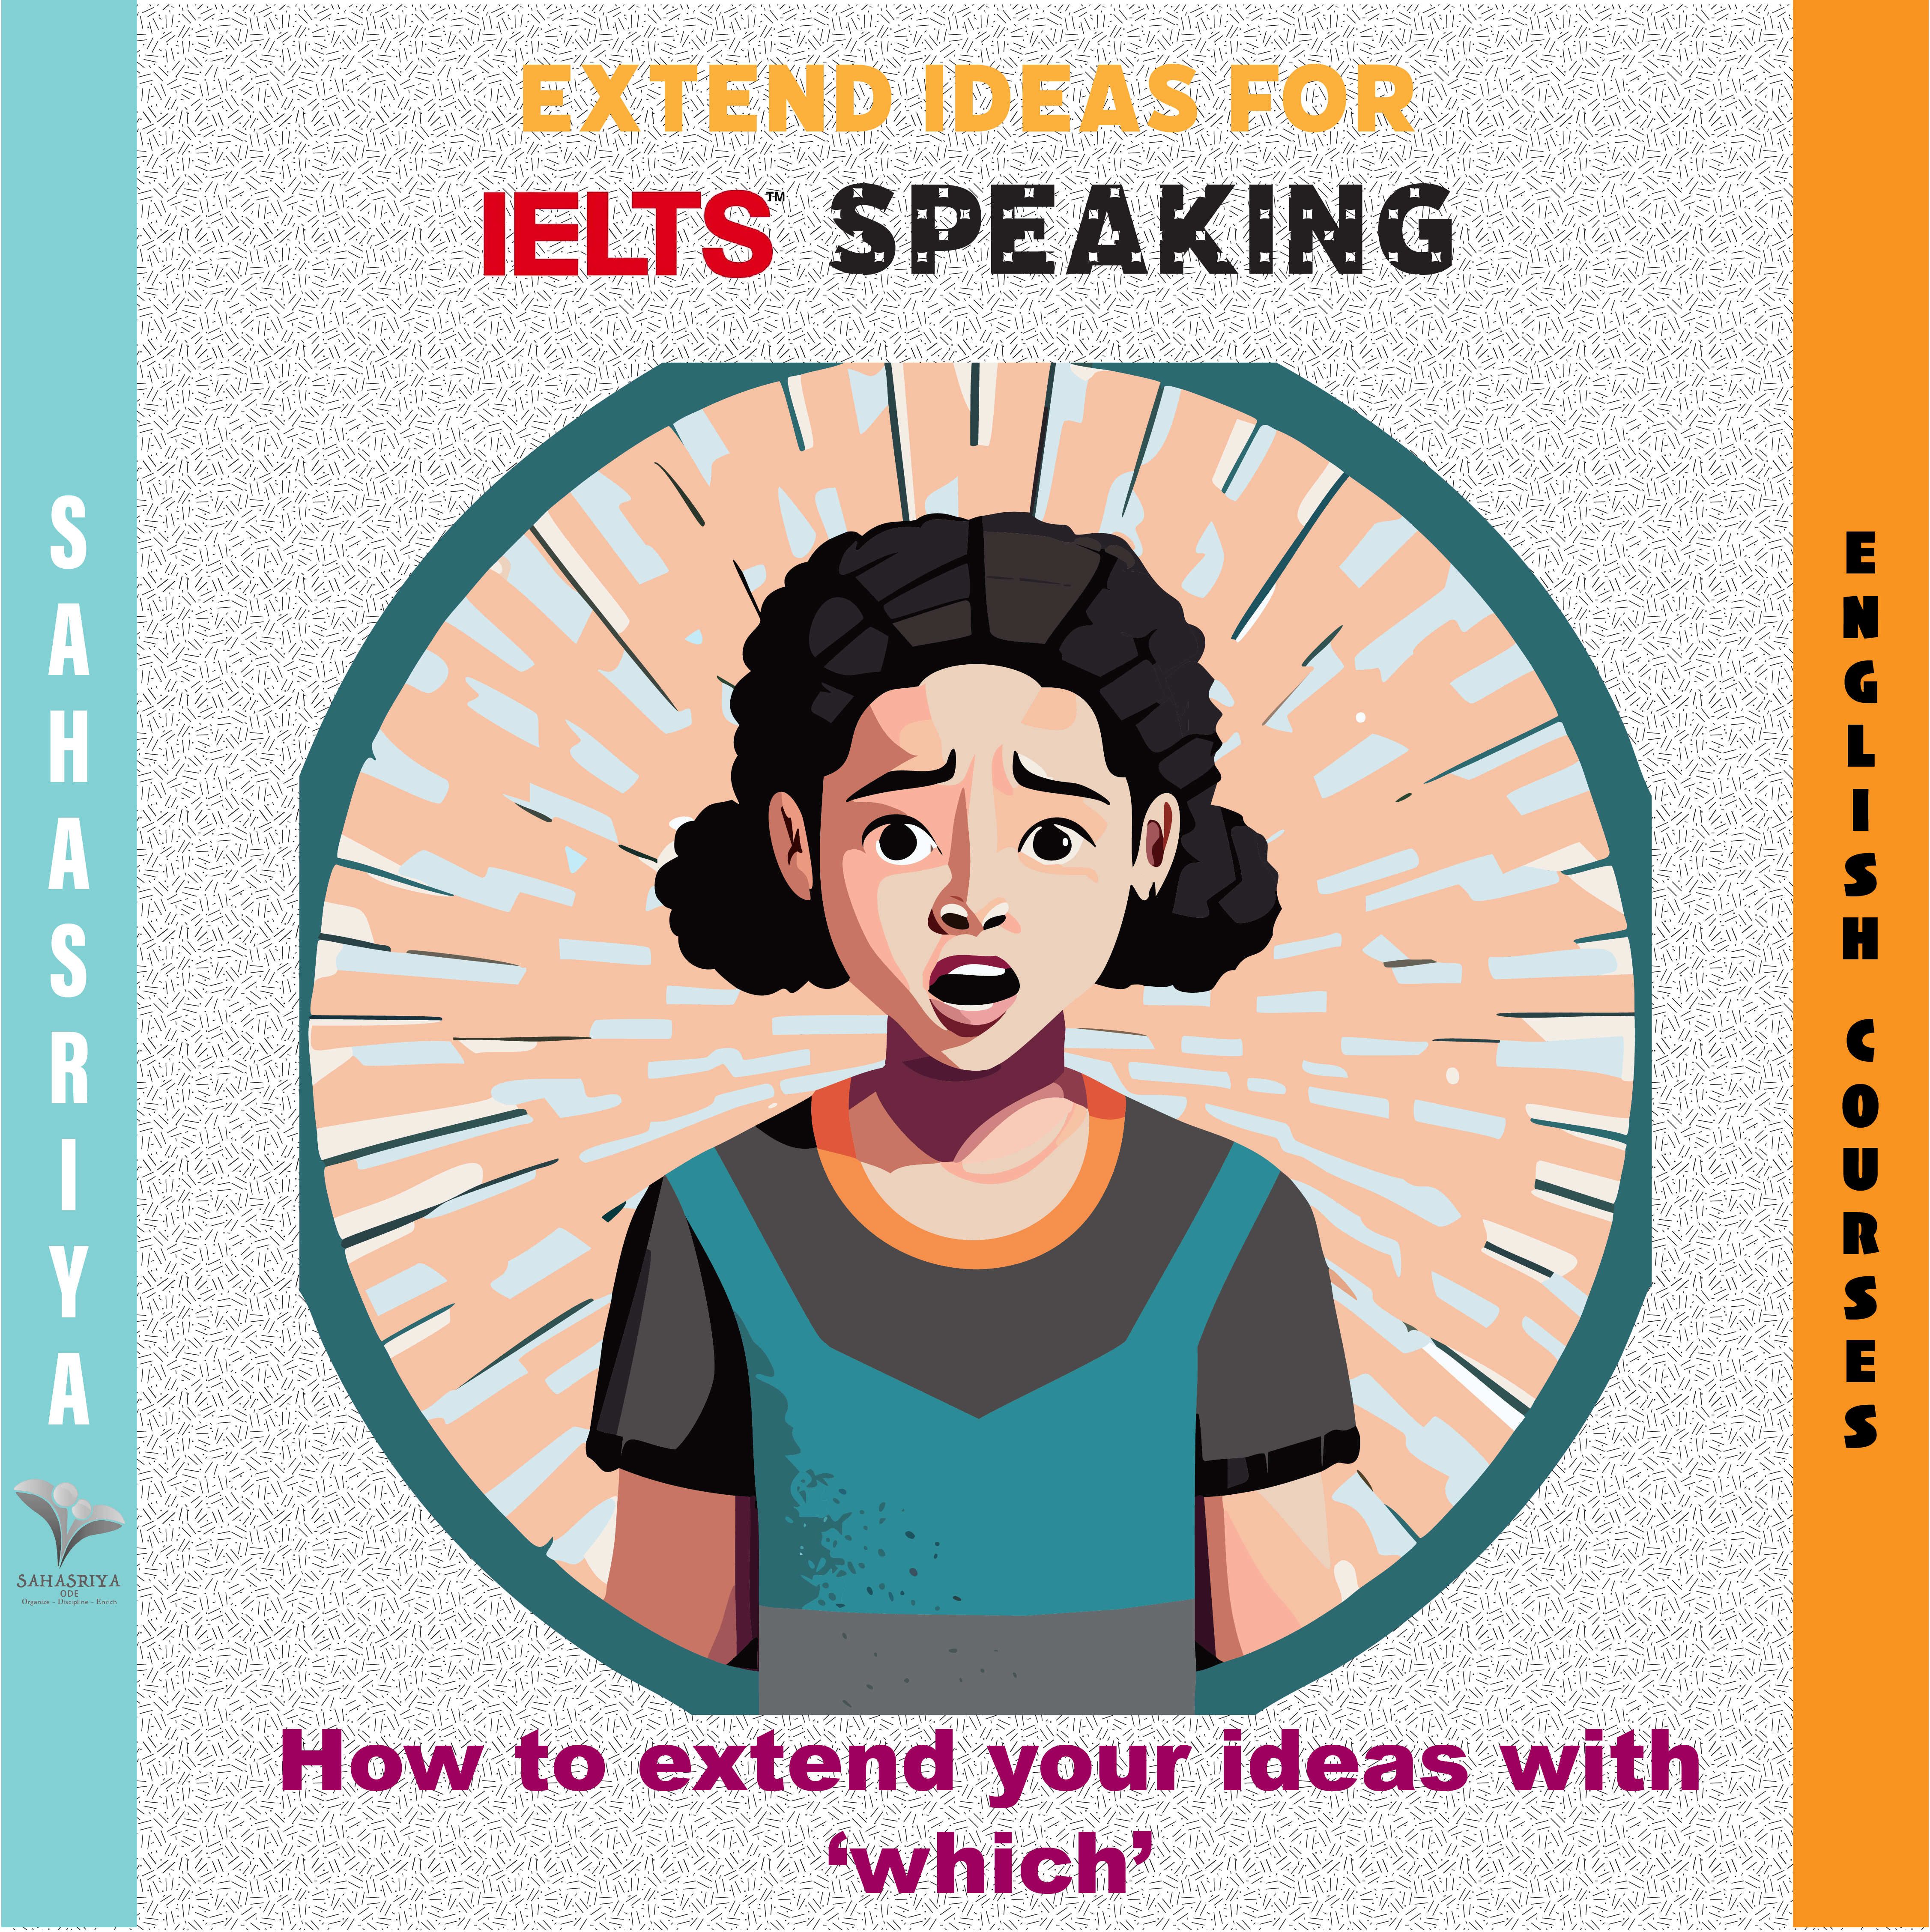 Do you know to extend your ideas with ‘which’? Learn in an exciting way!